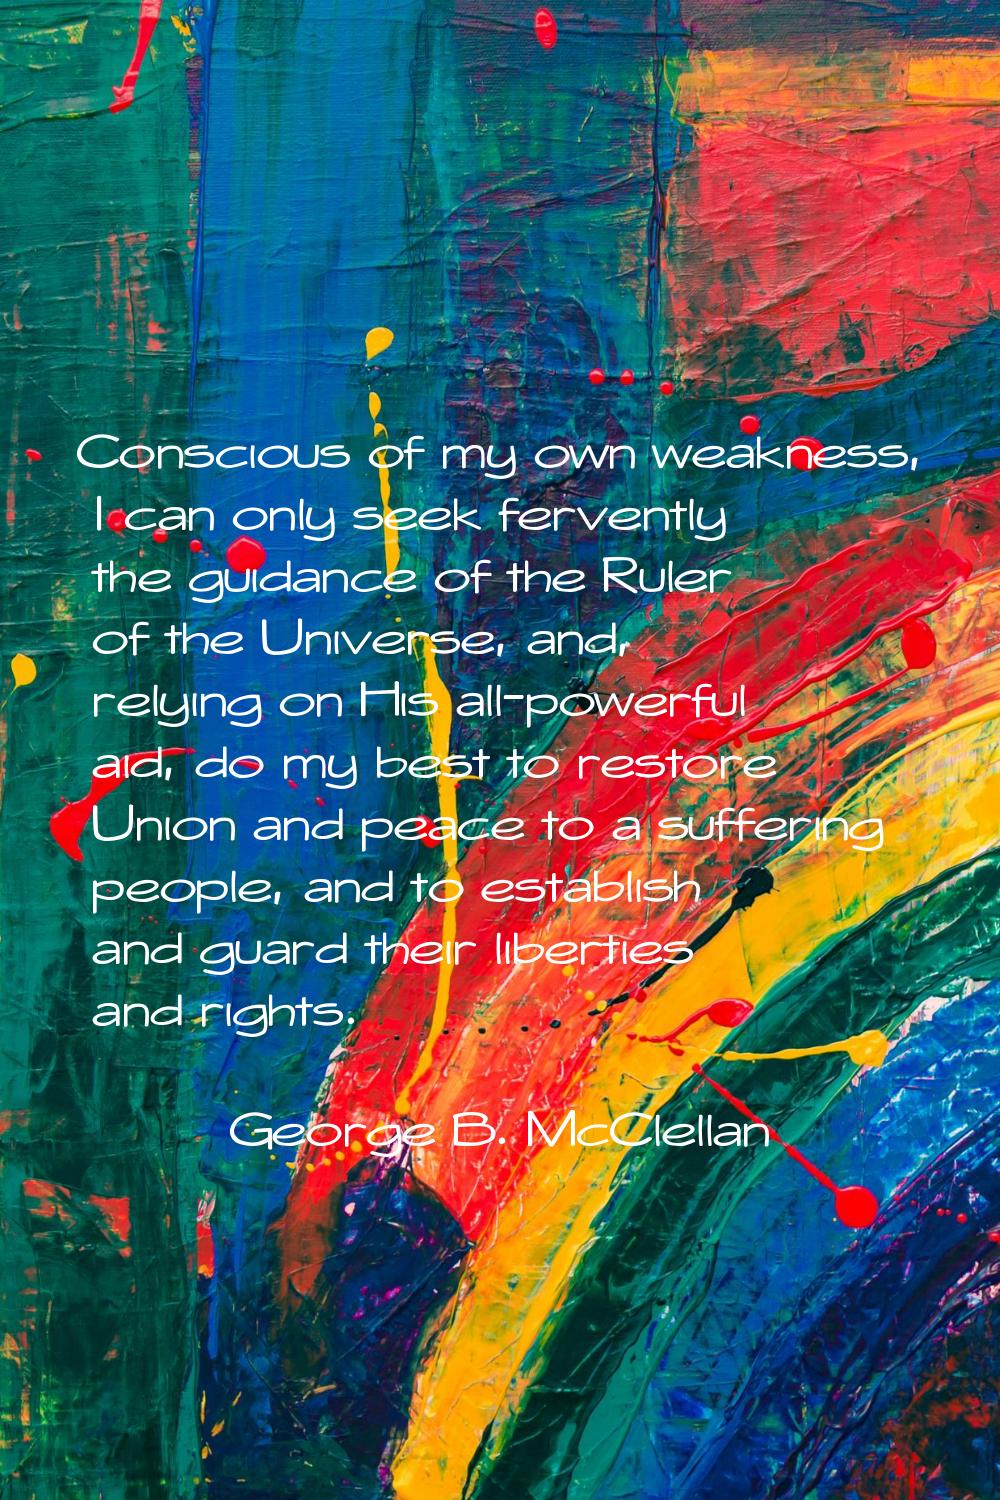 Conscious of my own weakness, I can only seek fervently the guidance of the Ruler of the Universe, 